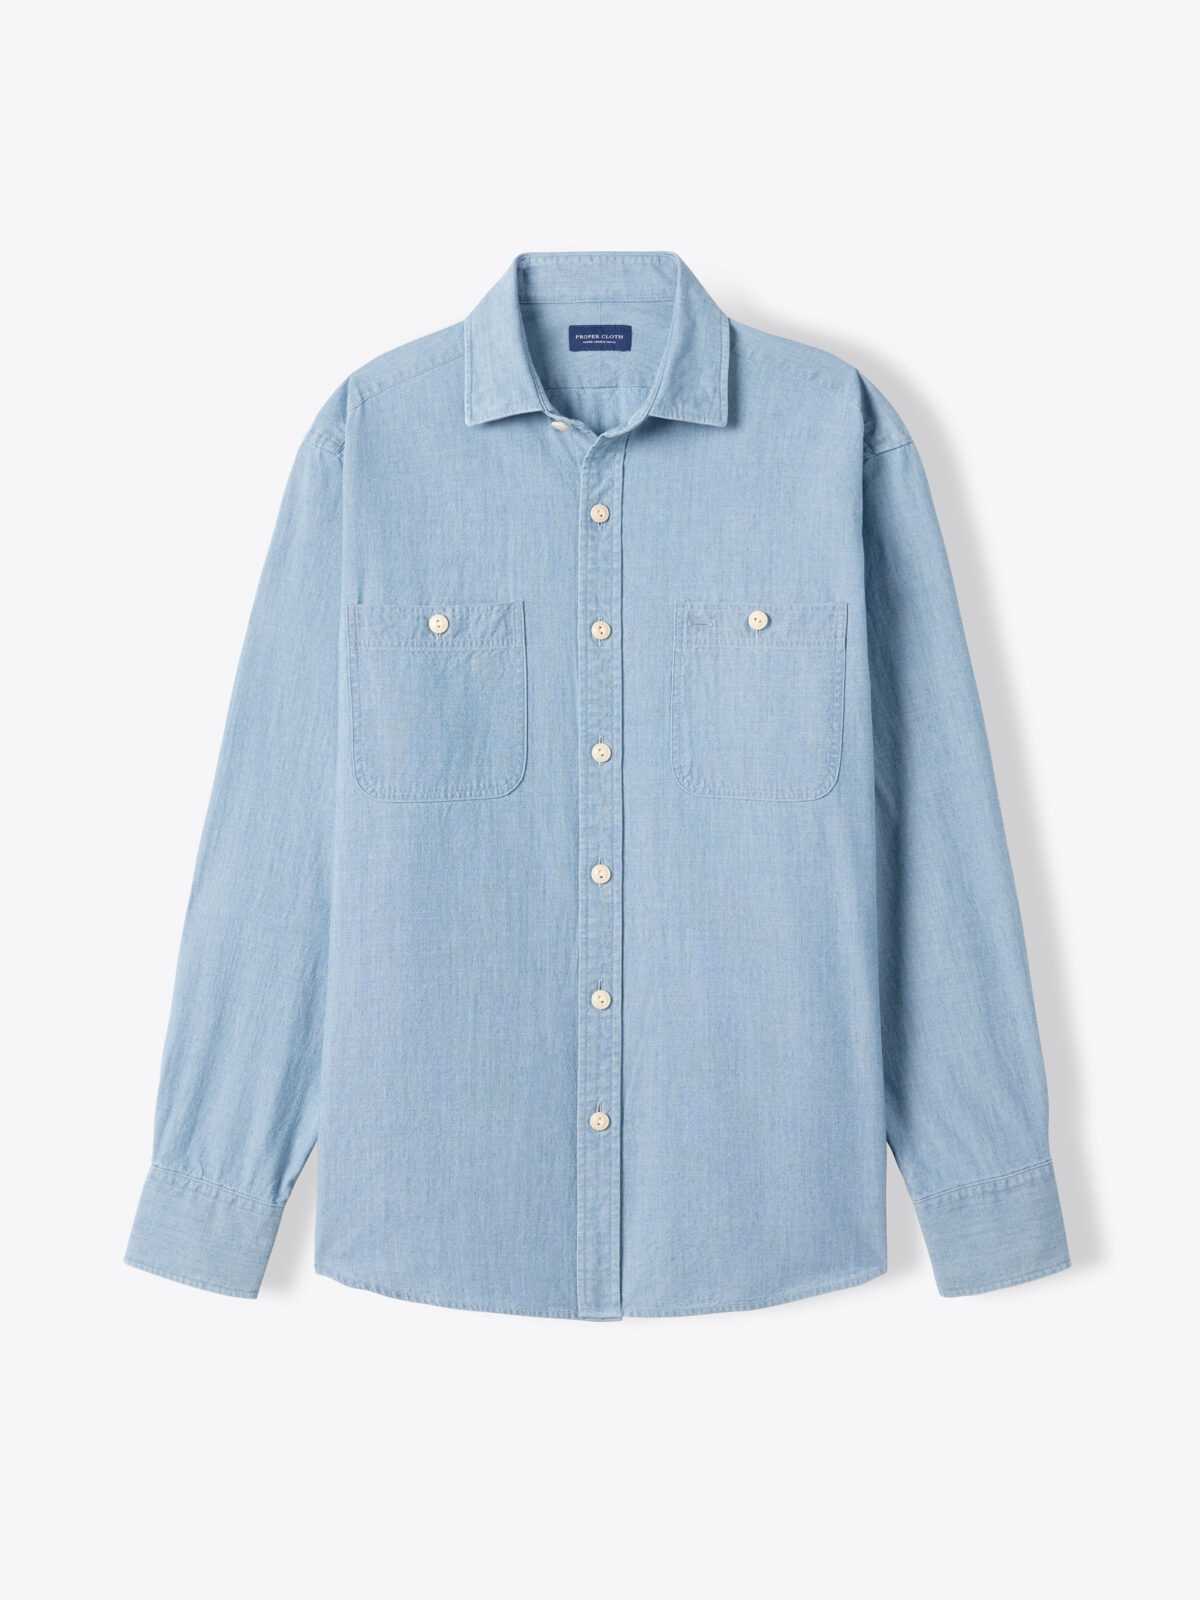 Washed Blue Chambray Linen Shirt by Proper Cloth